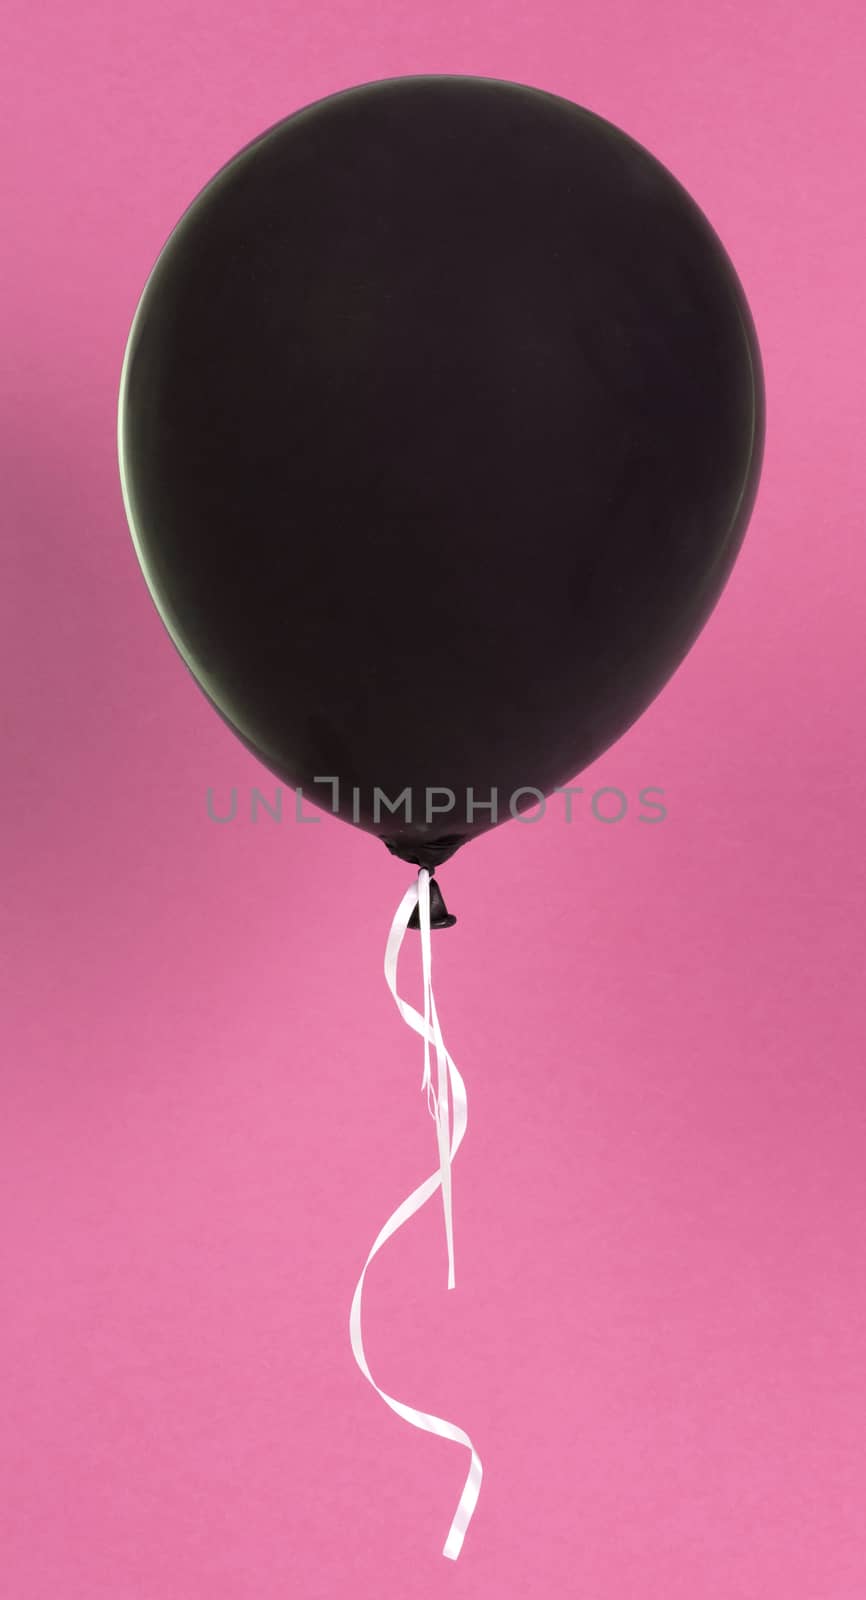 Black balloon isolated on a pink background